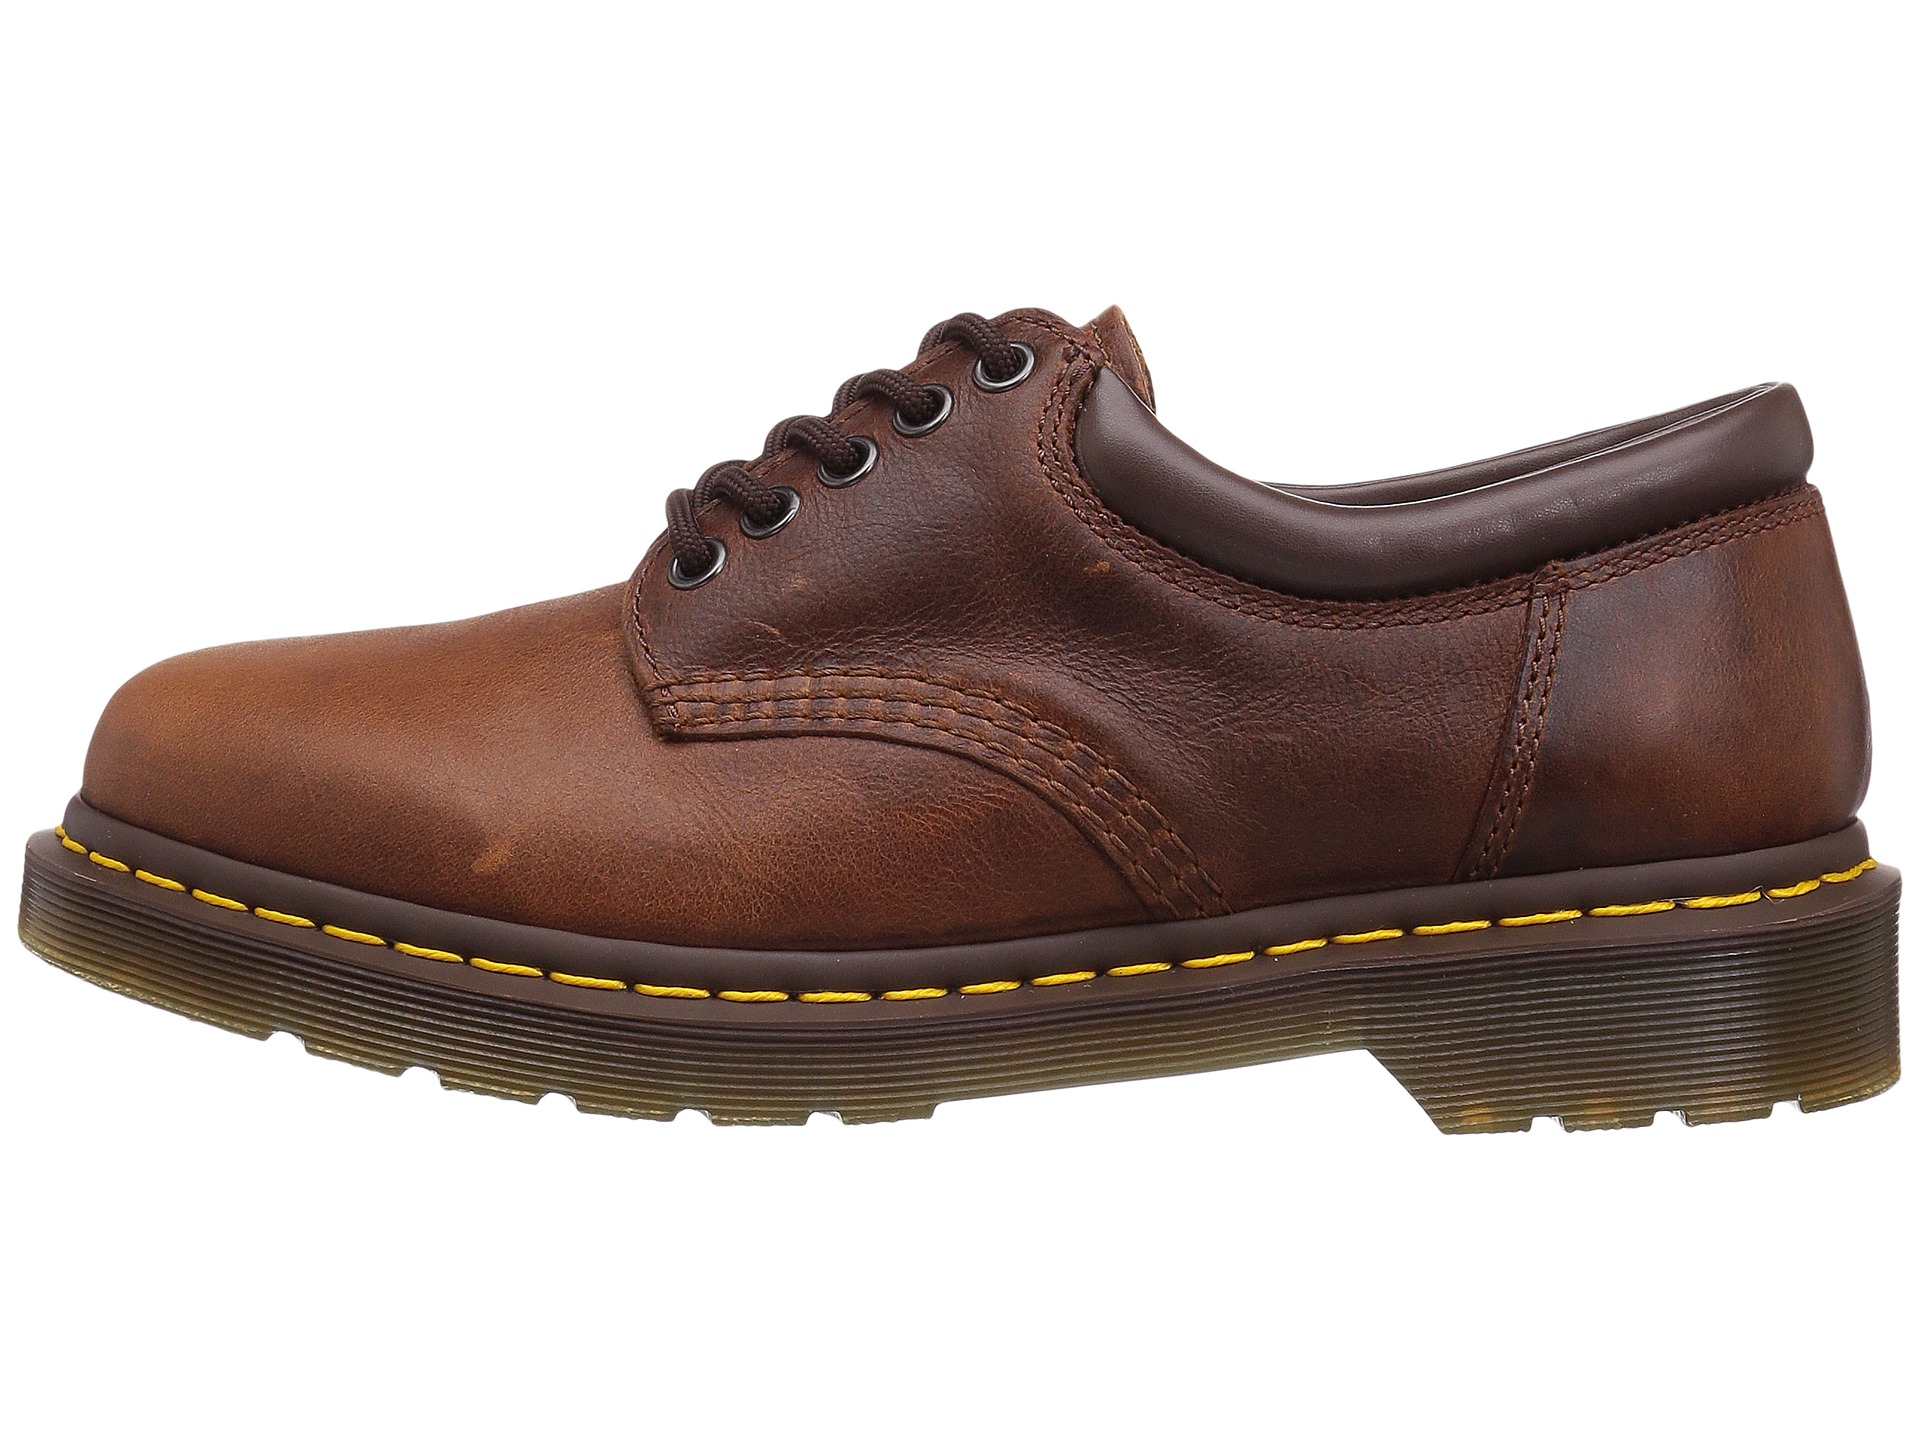 Dr. Martens 8053 - Zappos.com Free Shipping BOTH Ways